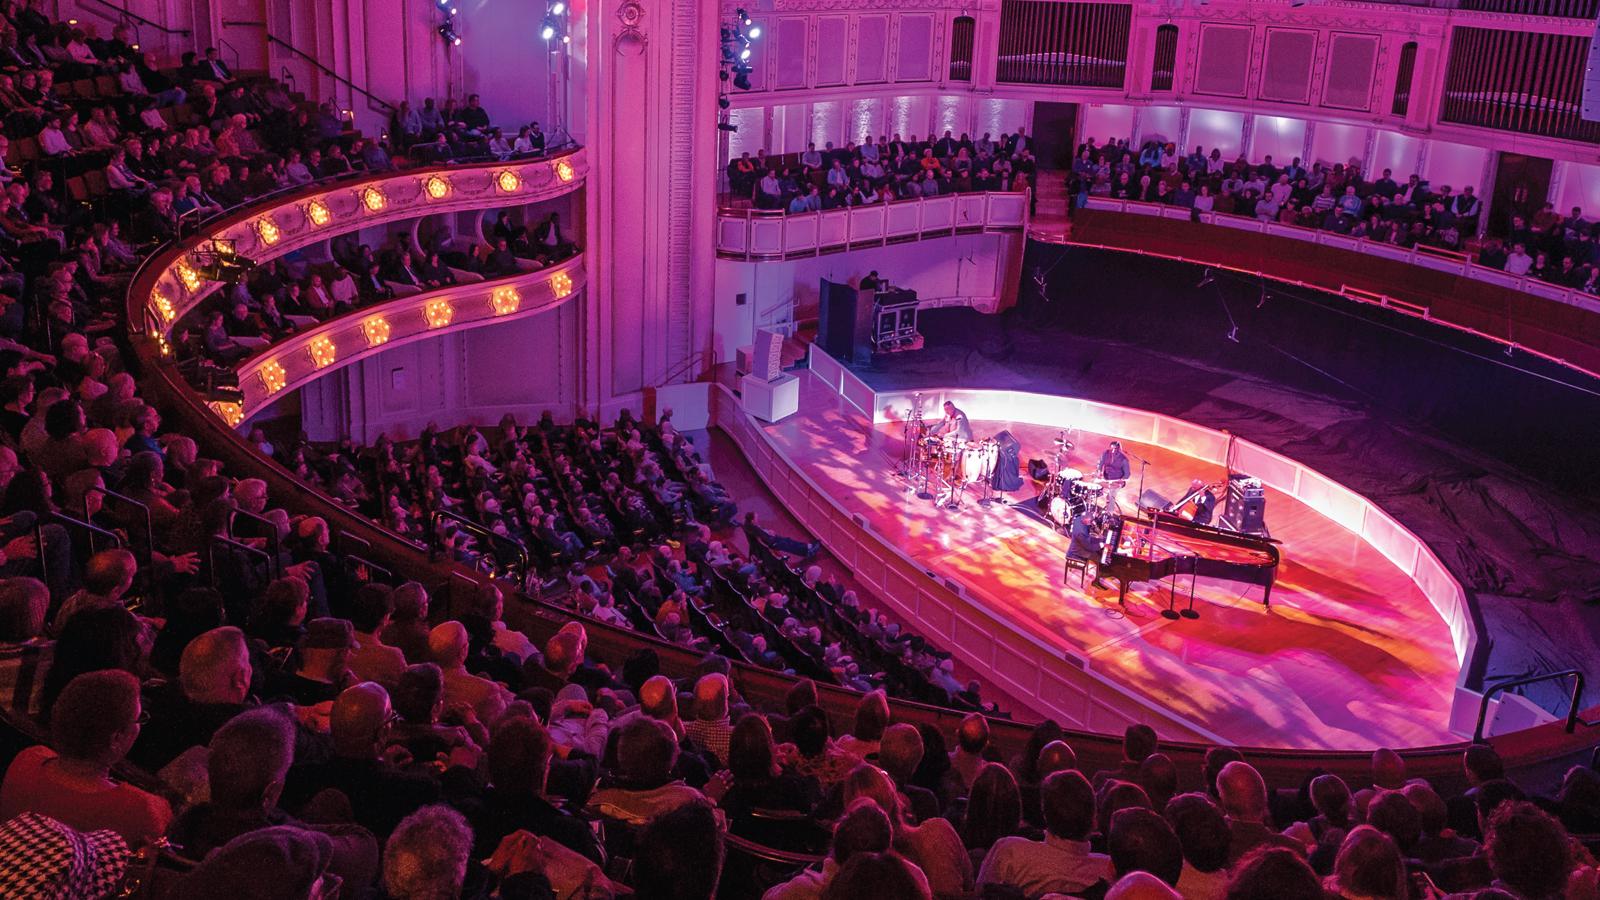 Chicago Symphony Orchestra Orchestra Hall